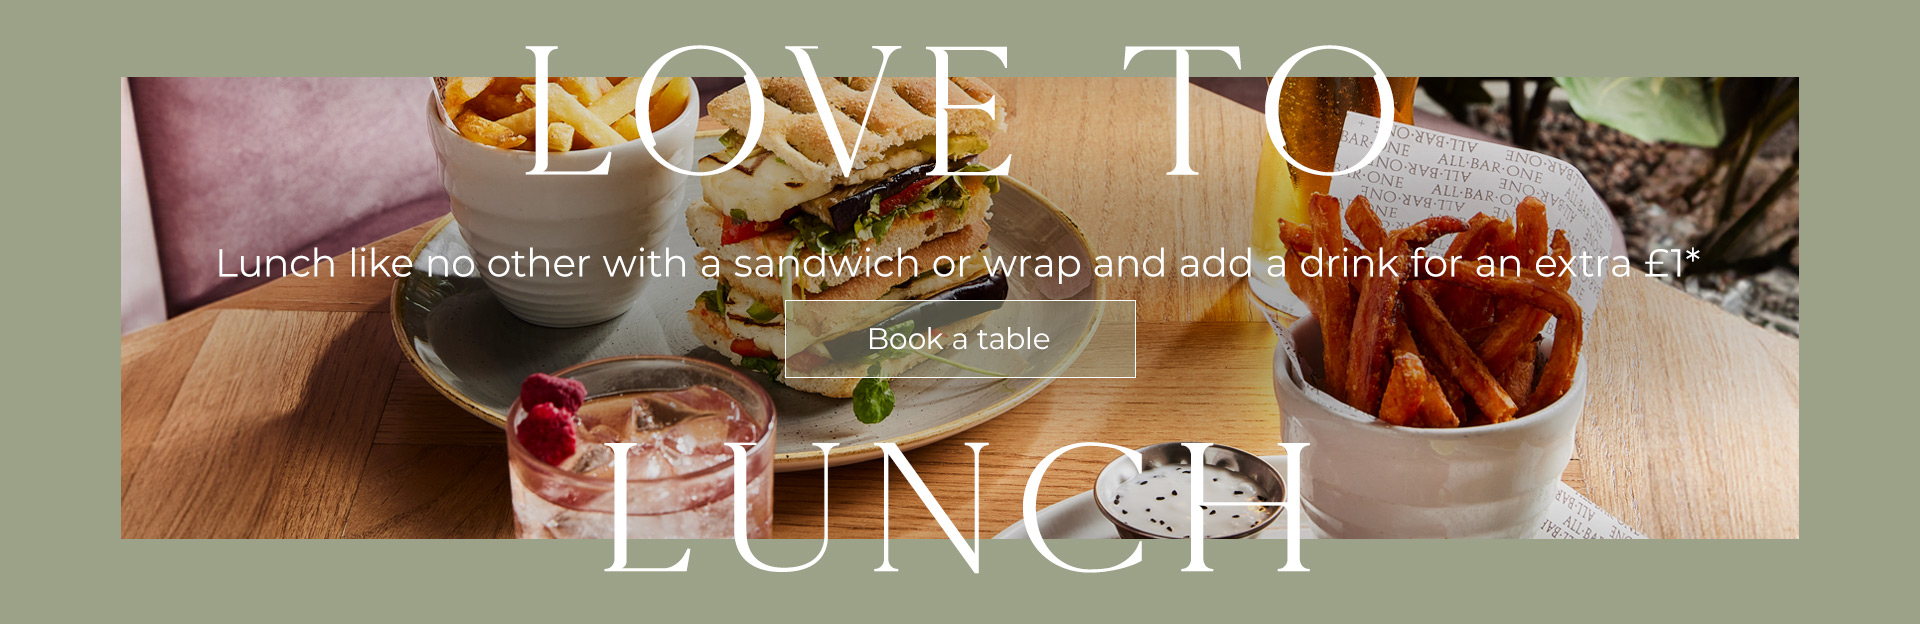 Lunch Offer at All Bar One Sutton